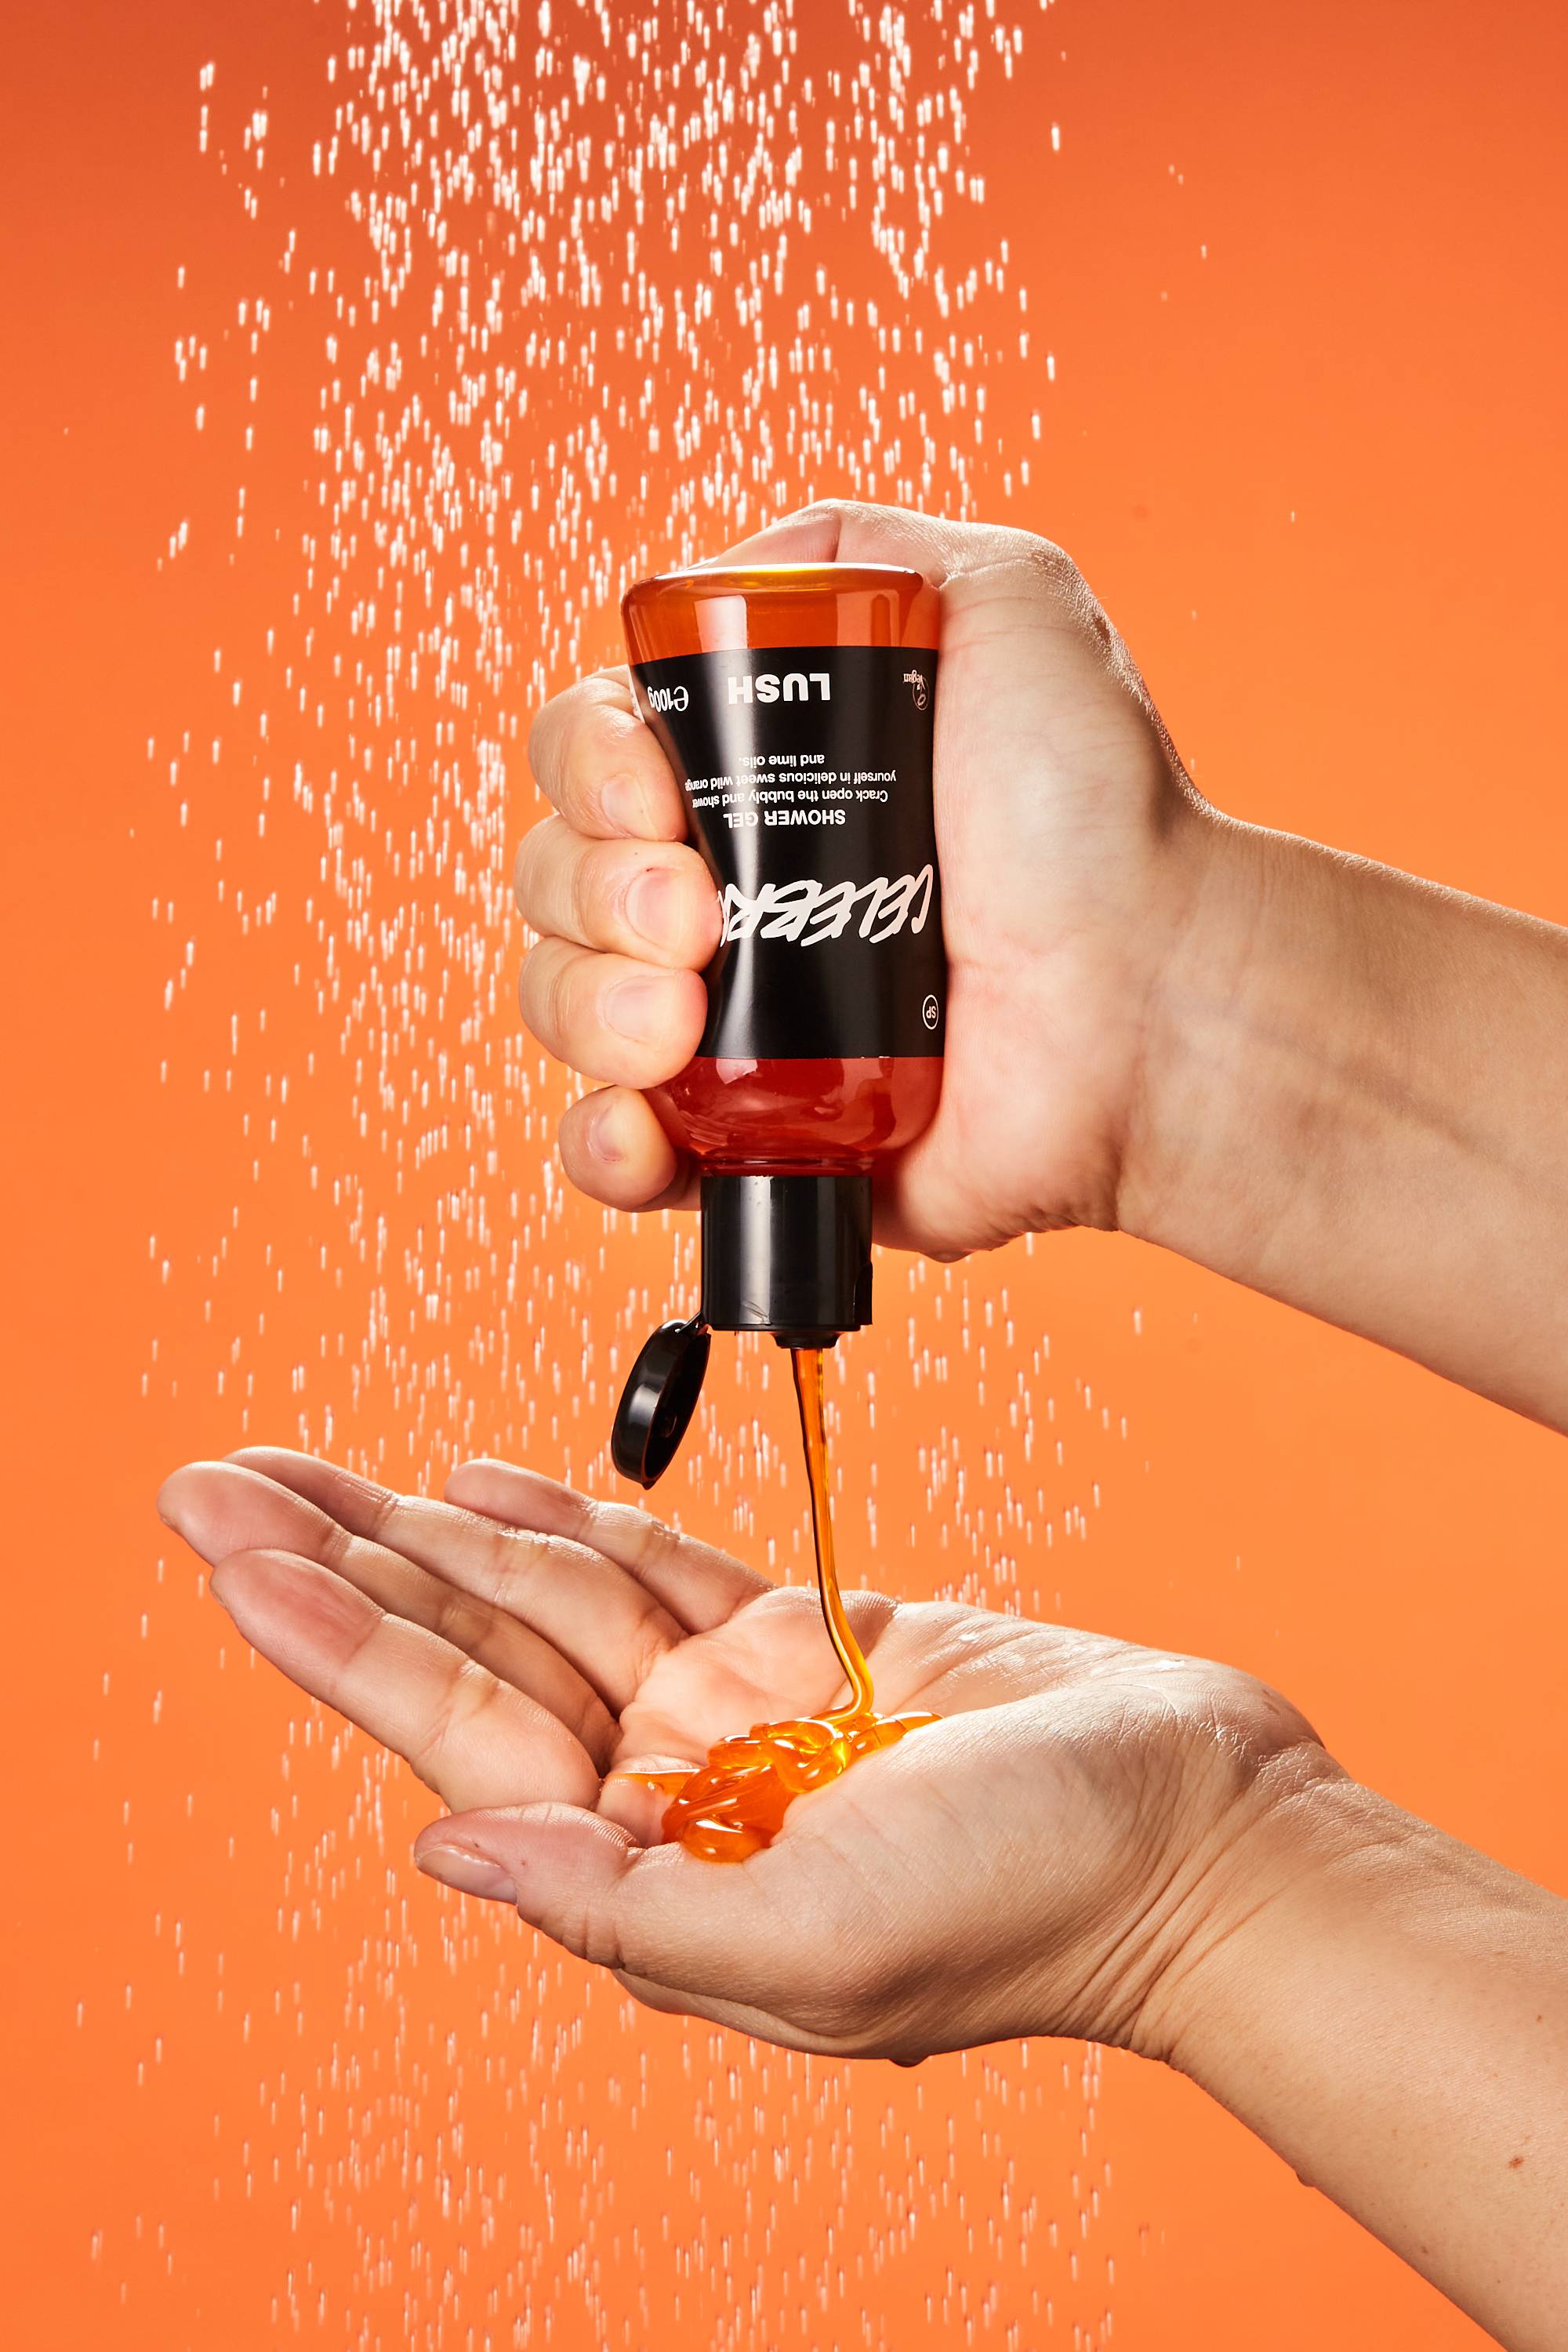 A close-up of the model's hand as they squeeze the Celebrate shower gel into their hand under running shower water.